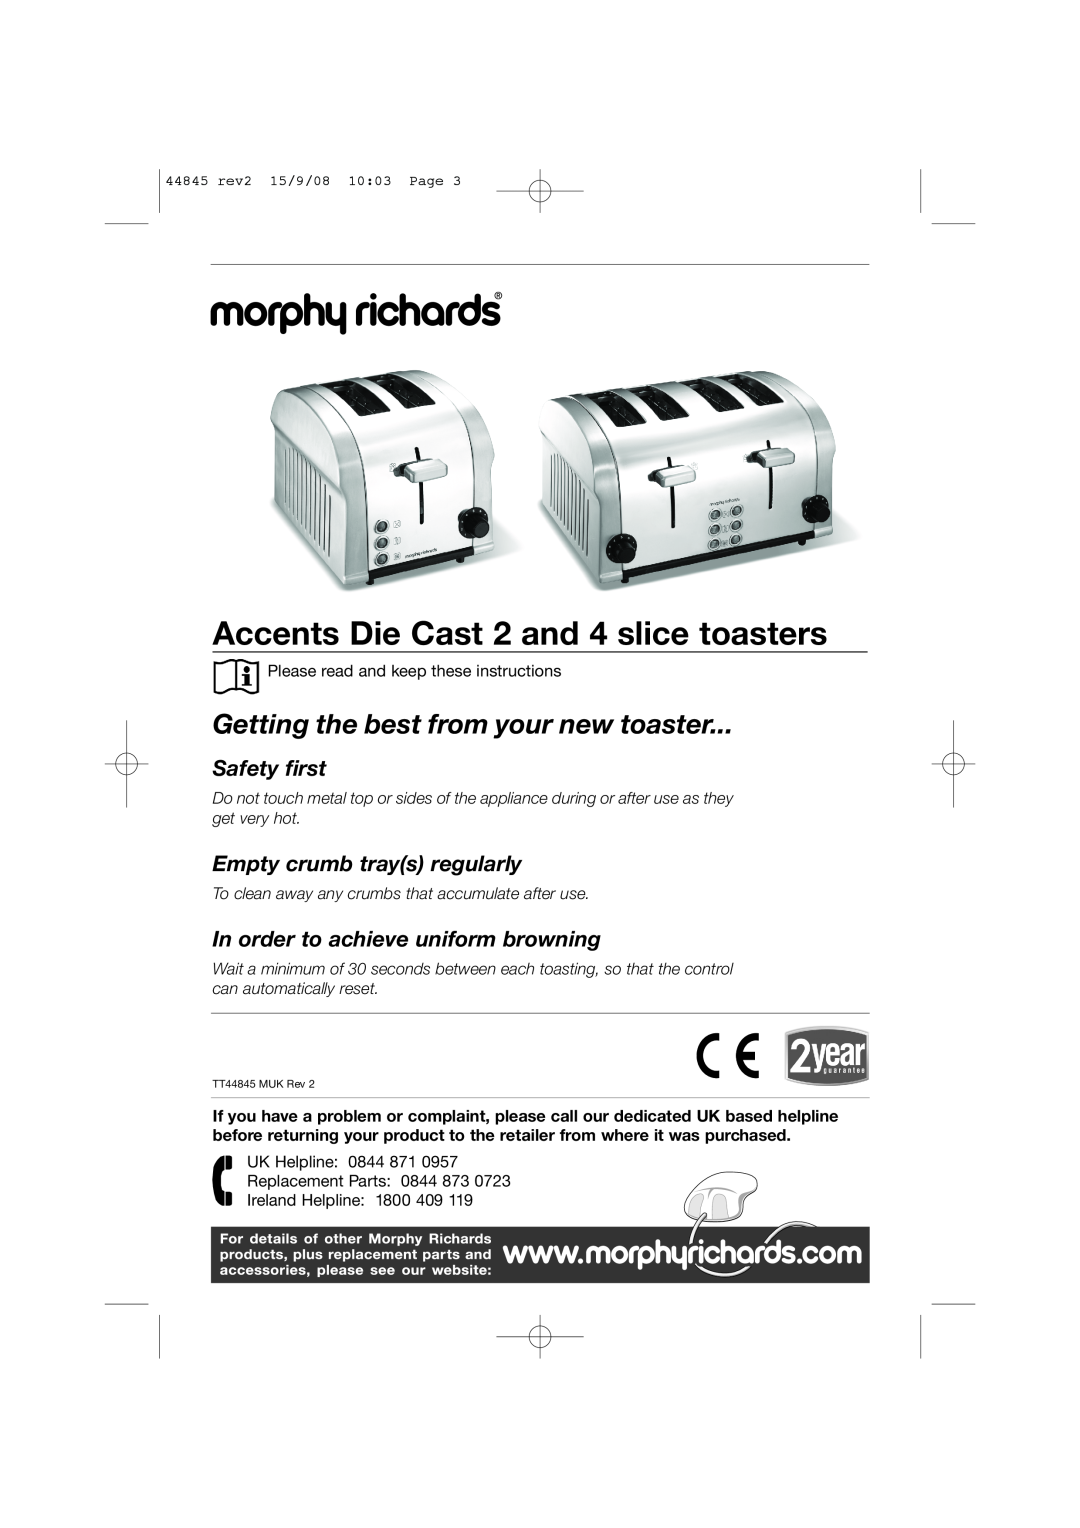 Morphy Richards 44845 manual Accents Die Cast 2 and 4 slice toasters, Getting the best from your new toaster, Safety first 